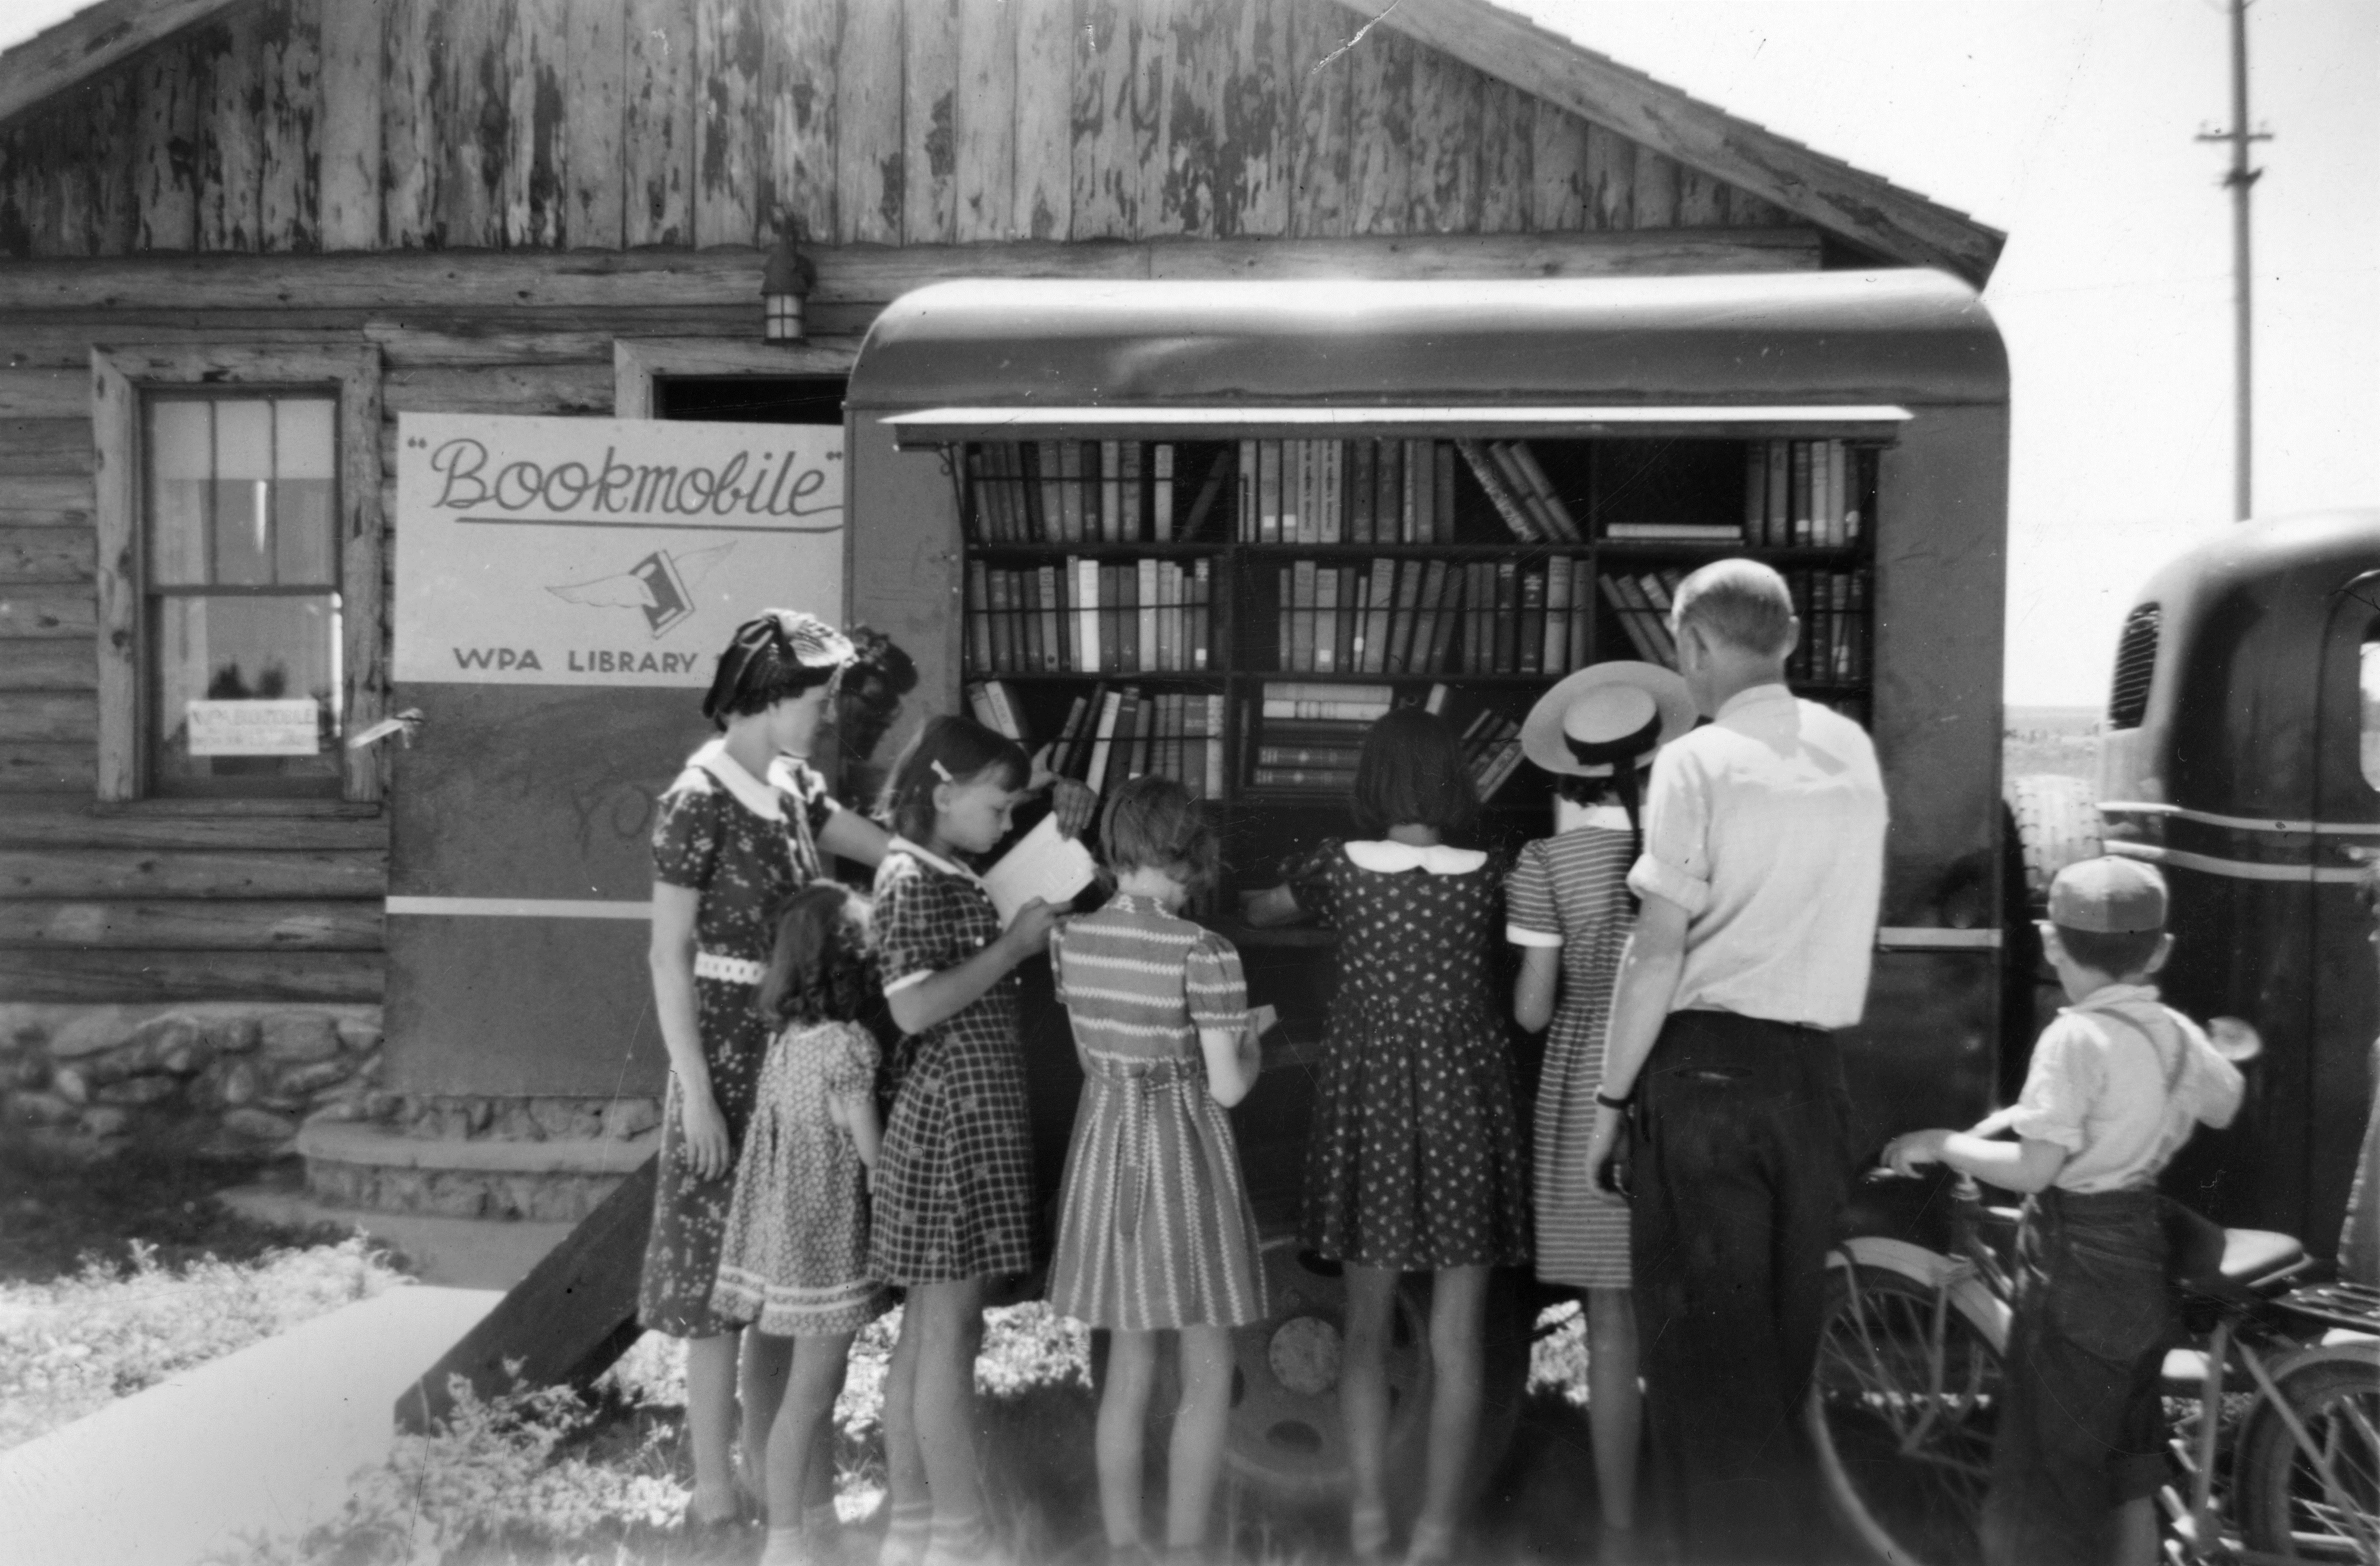 A group of young women gather around a Works Progress Administration (WPA) Bookmobile in Fairfield, Montana. A woman, man, and young boy are also present. Date unknown.